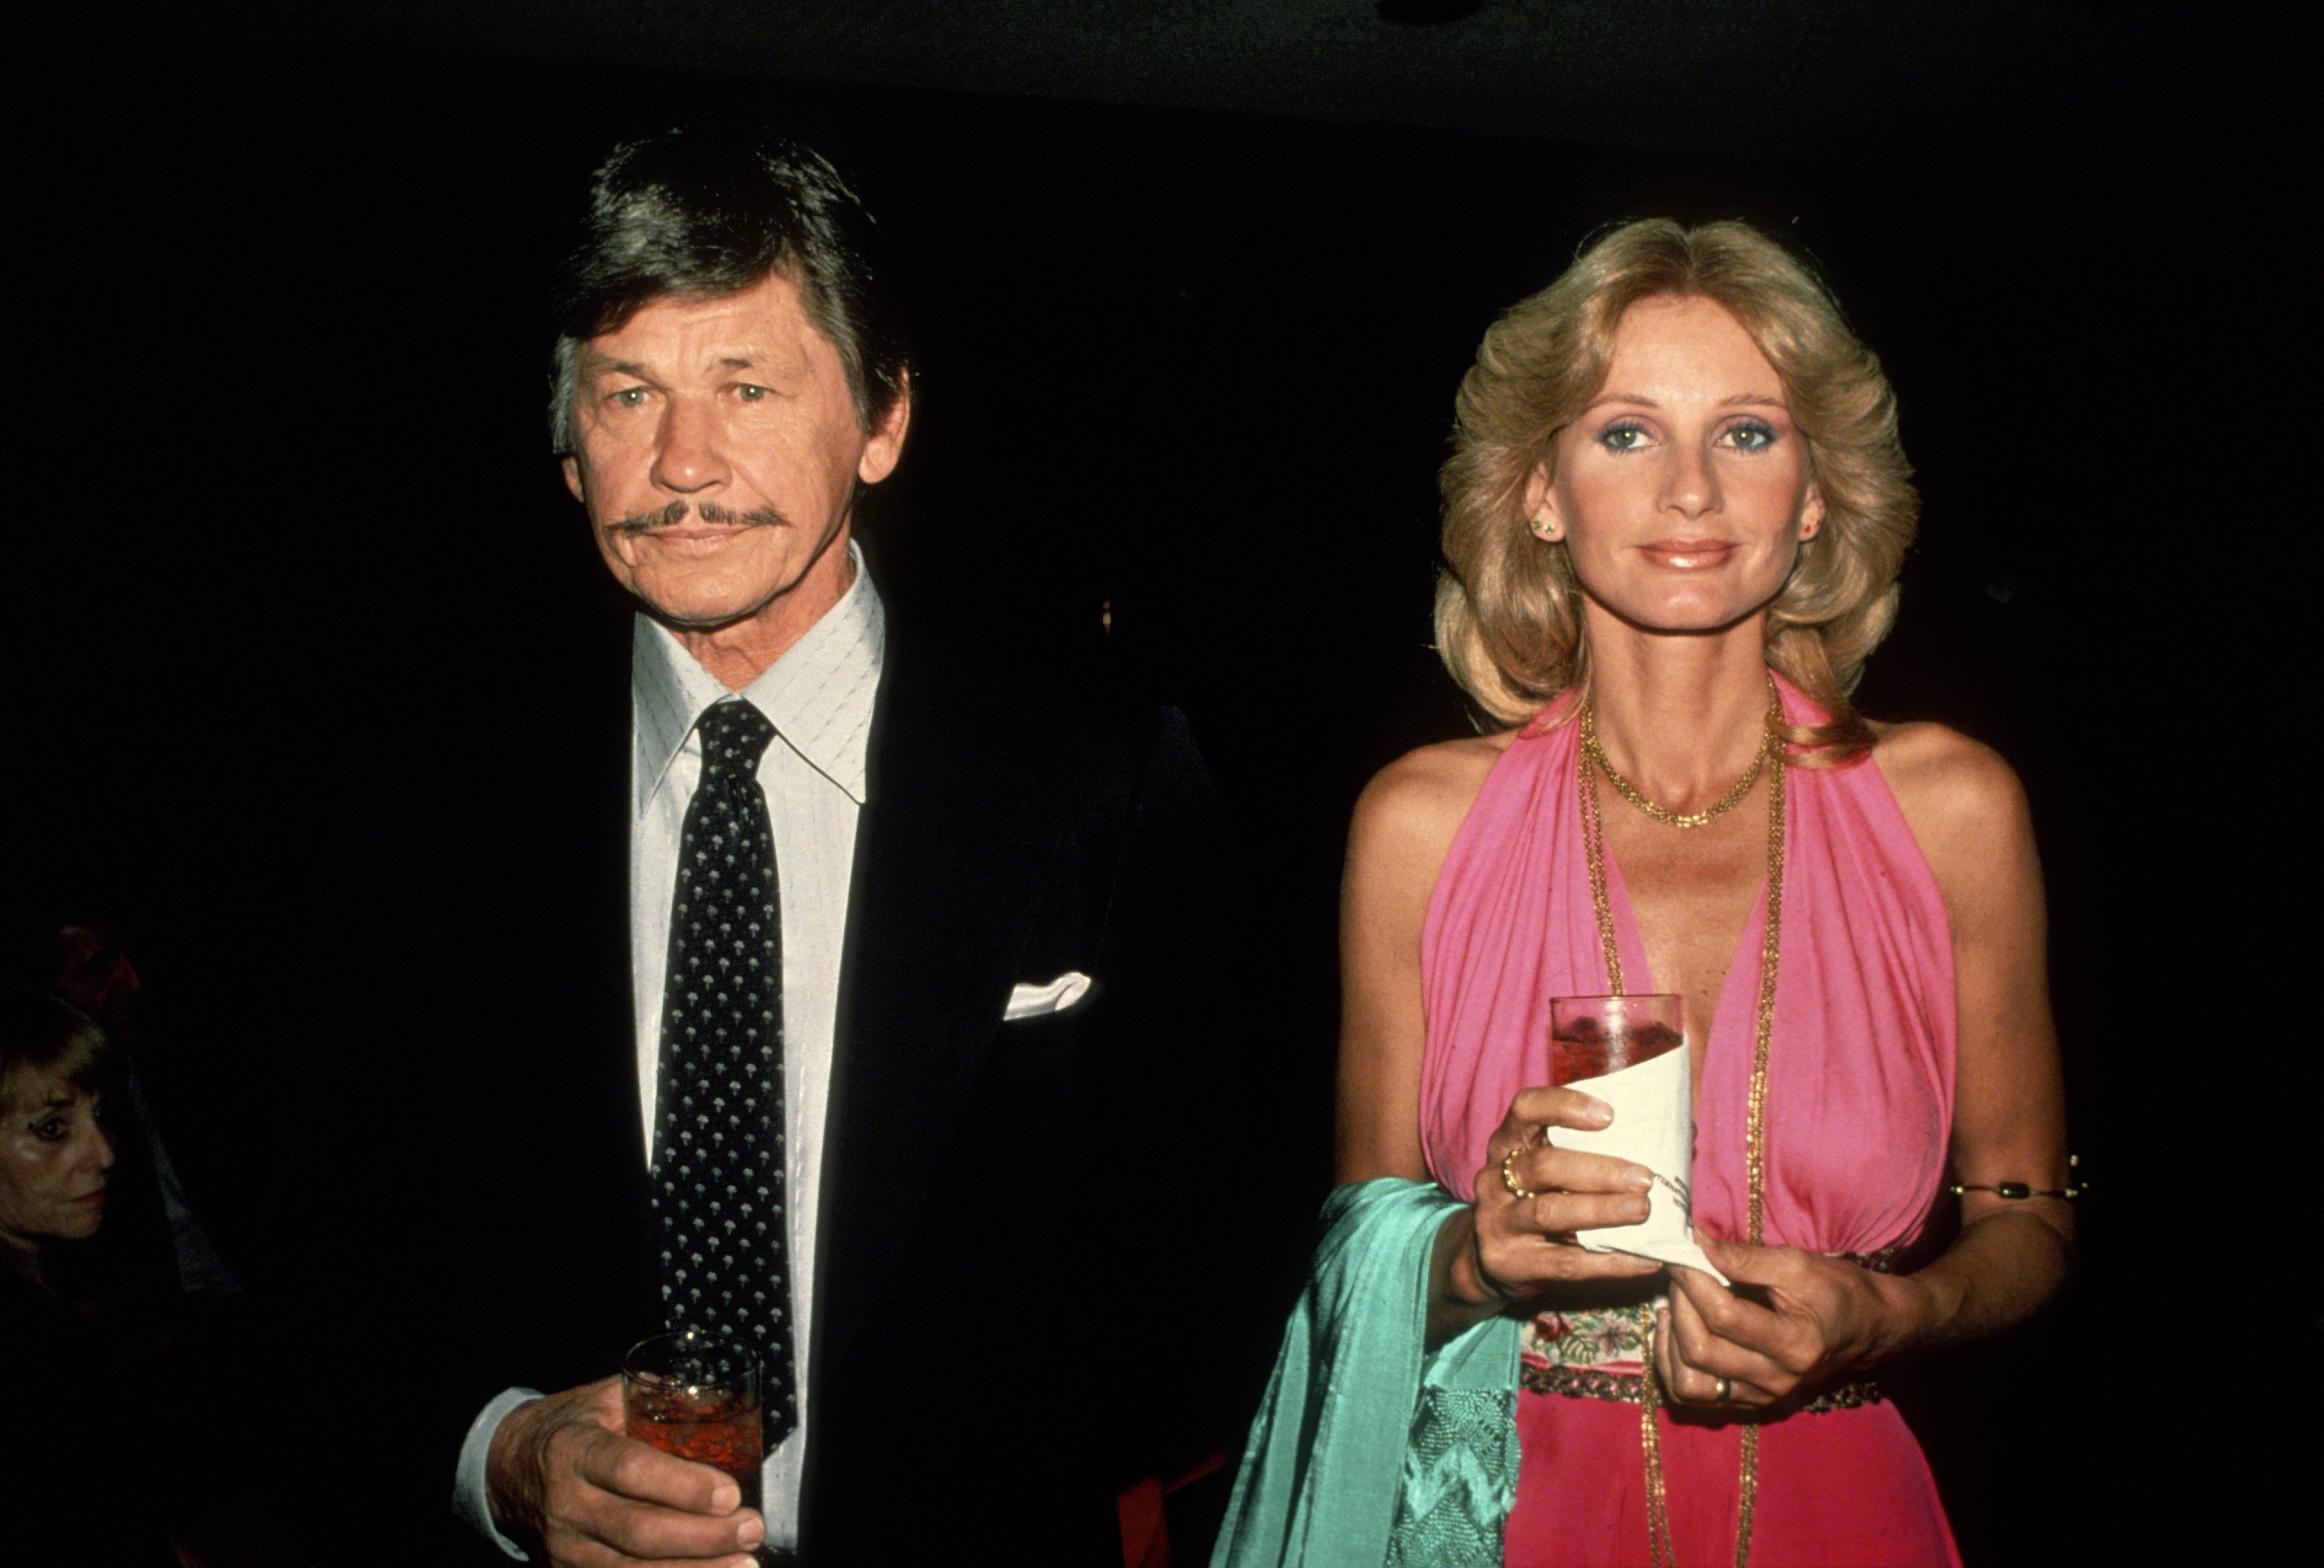 Charles Bronson and Jill Ireland in 1979 in New York City. | Source: Getty Images